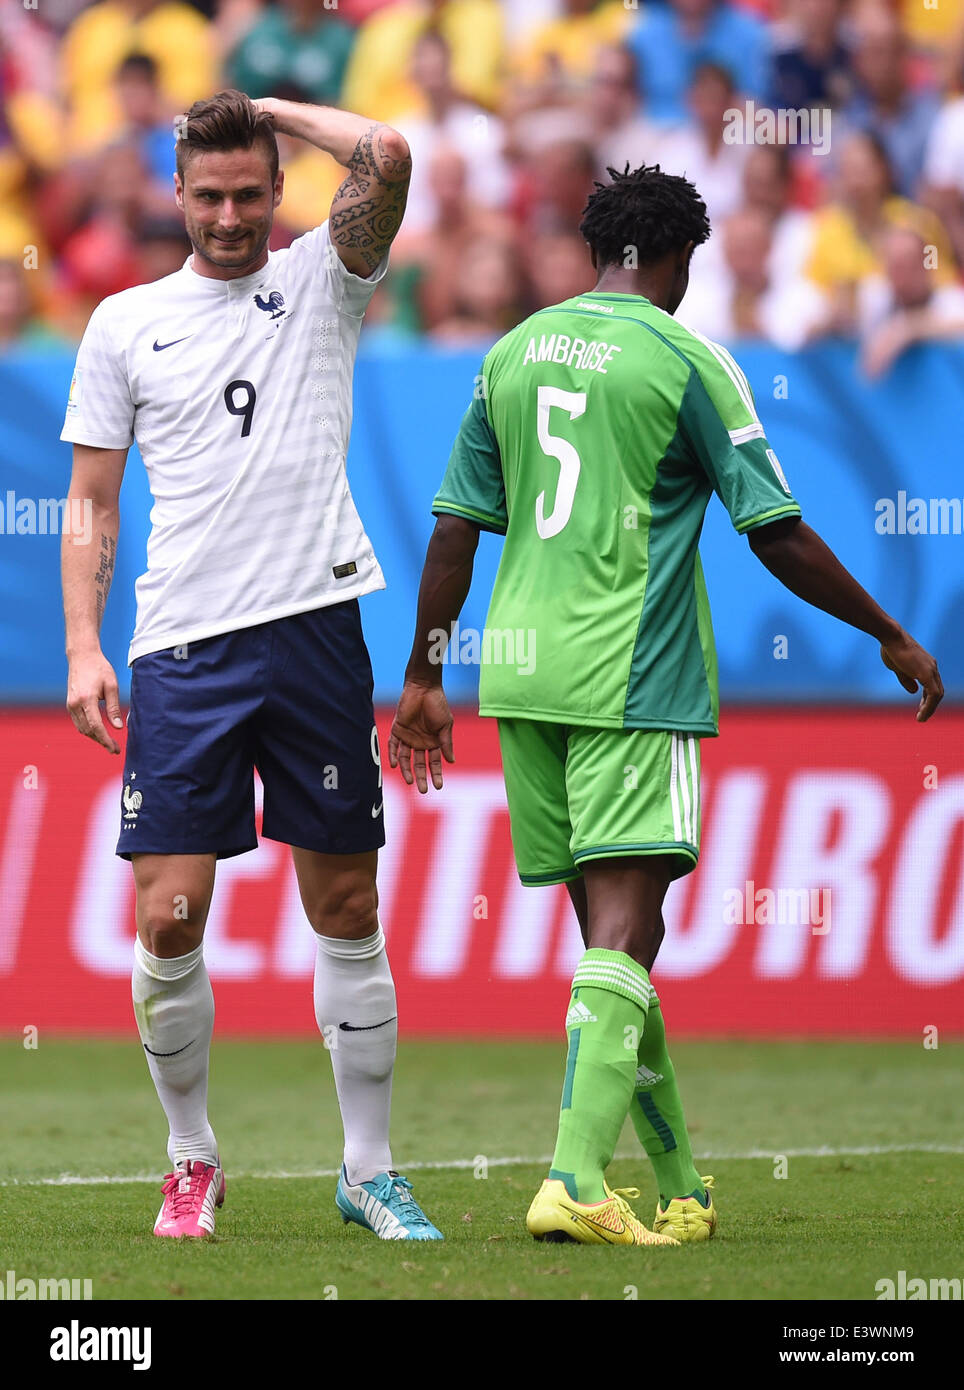 Brasilia, Brazil. 30th June, 2014. Olivier Giroud (L) of France reacts next to Efe Ambrose of Nigeria during the FIFA World Cup 2014 round of 16 match between France and Nigeria at the Estadio National Stadium in Brasilia, Brazil, on 30 June 2014. Credit:  dpa picture alliance/Alamy Live News Stock Photo